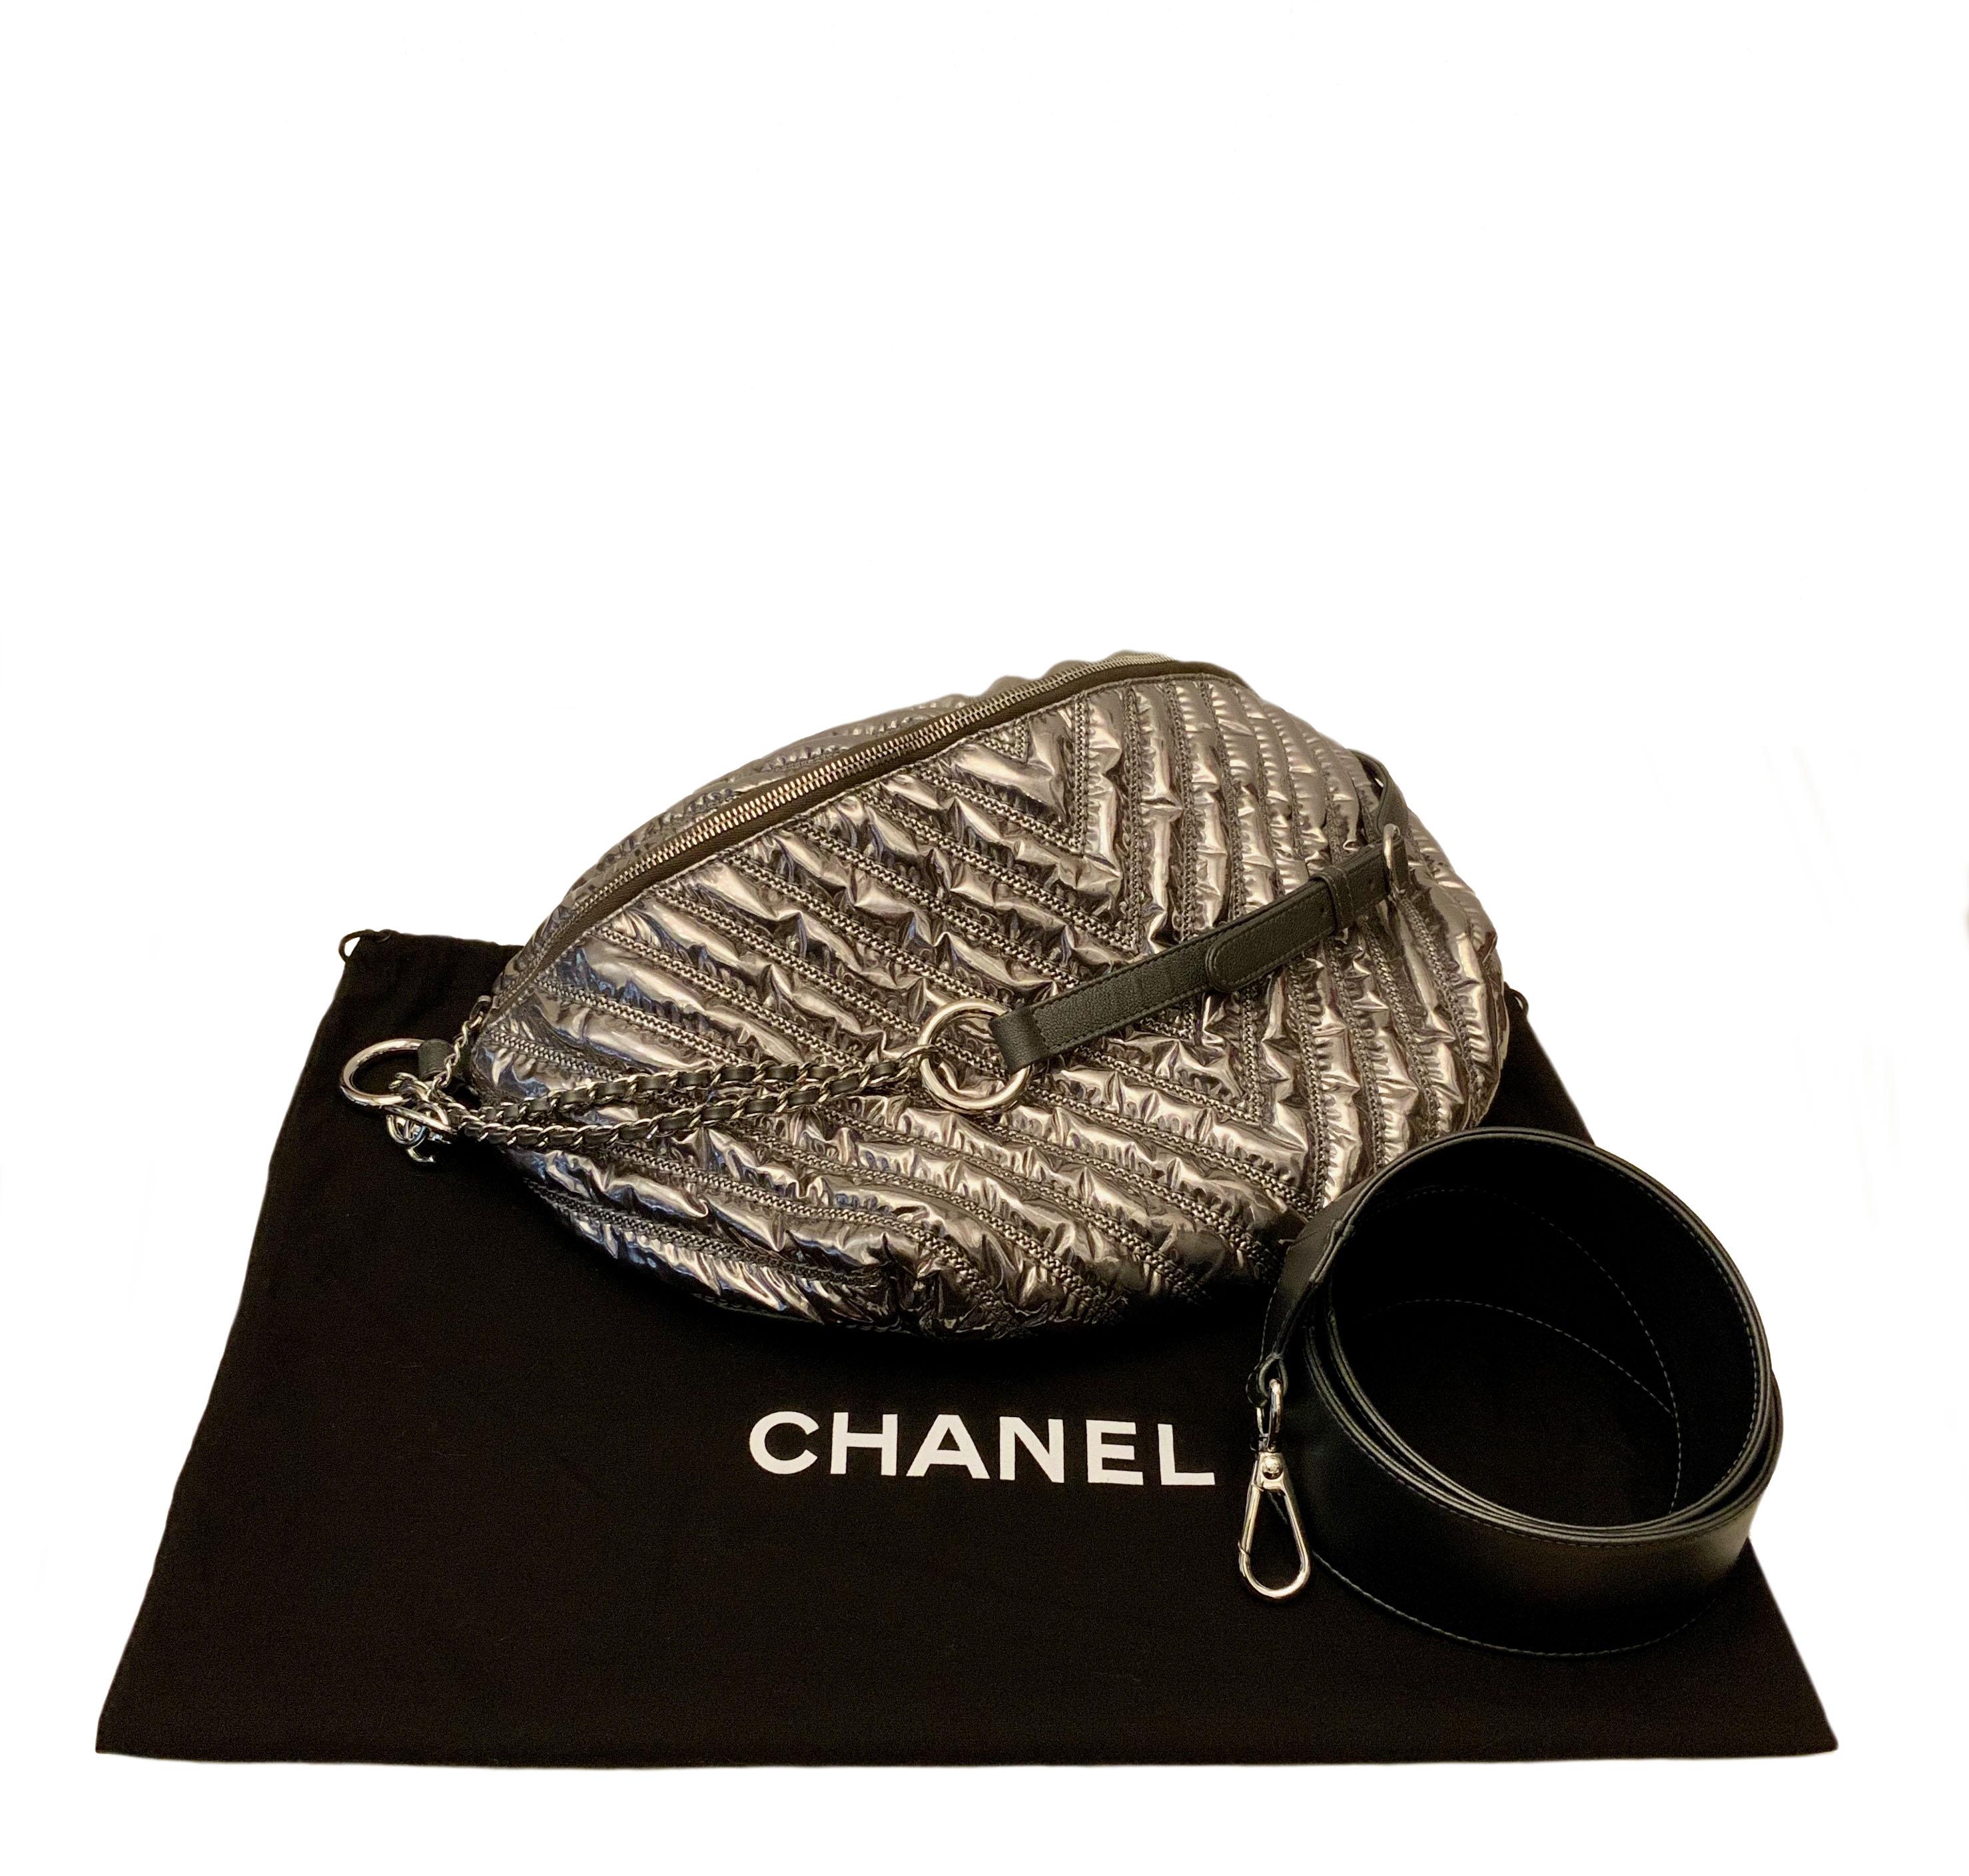 This pre-owned but New oversized waist belt / crossbody bag from Chanel is a runway piece, part of the Fall Winter Collection 2017. It is in a larger size than the boutique ones.
Crafted in a silver metallic lamé fabric in a chevron herringbone